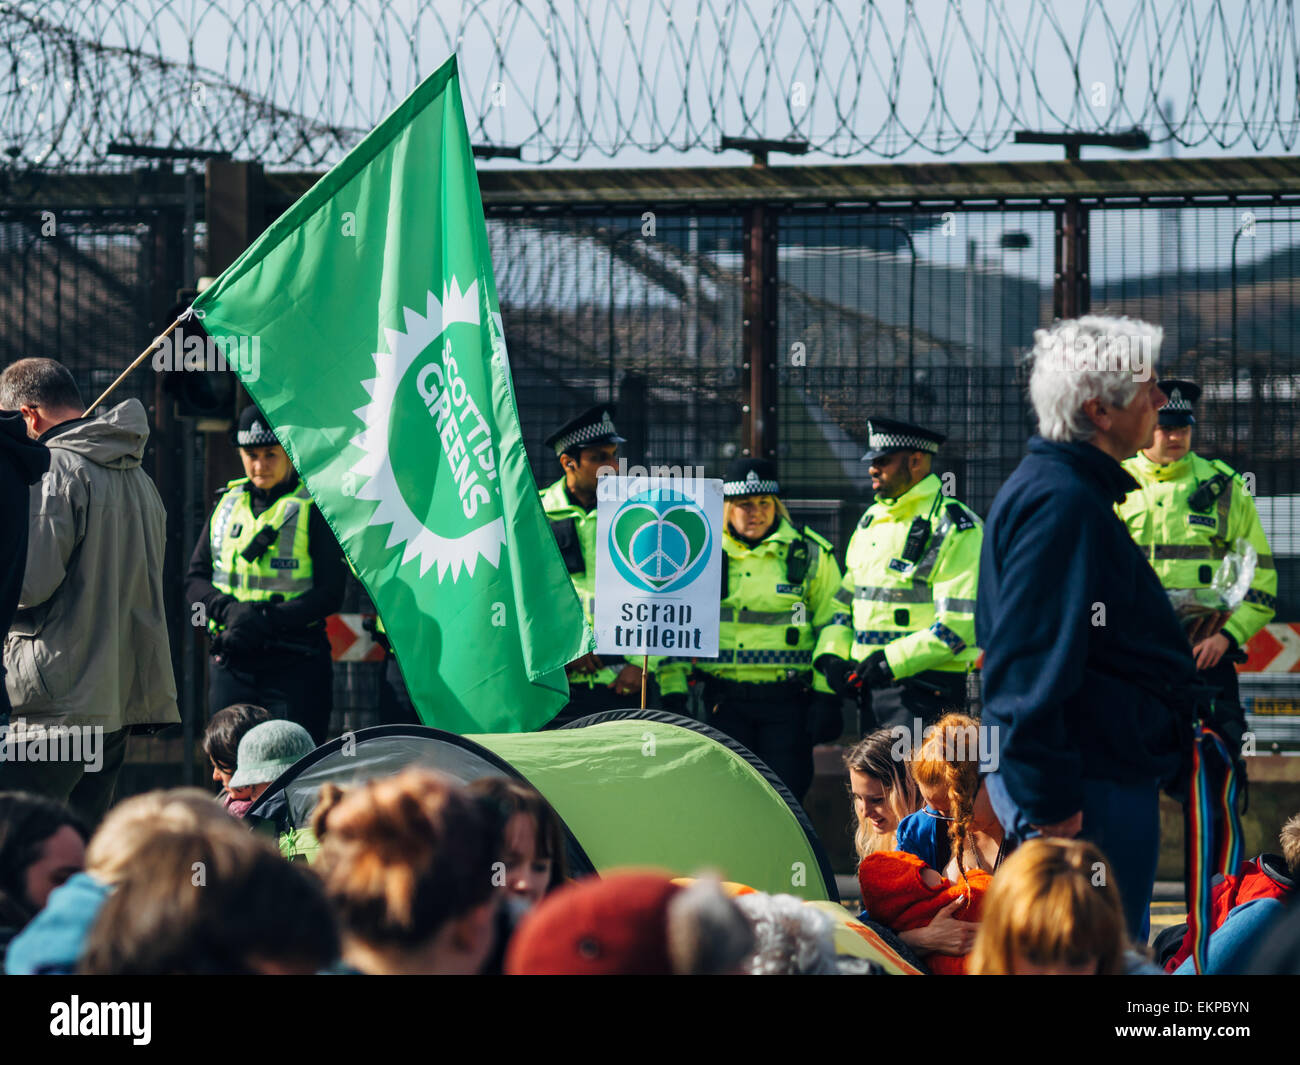 Glasgow, UK. 13th April, 2015. Protestors of all ages gather at Faslane Naval base in Glasgow to capmpaign against the Trident nuclear submarines based there, with the slogans 'Scrap Trident' & #BairnsNotBombs. Credit:  Alan Robertson/Alamy Live News Stock Photo